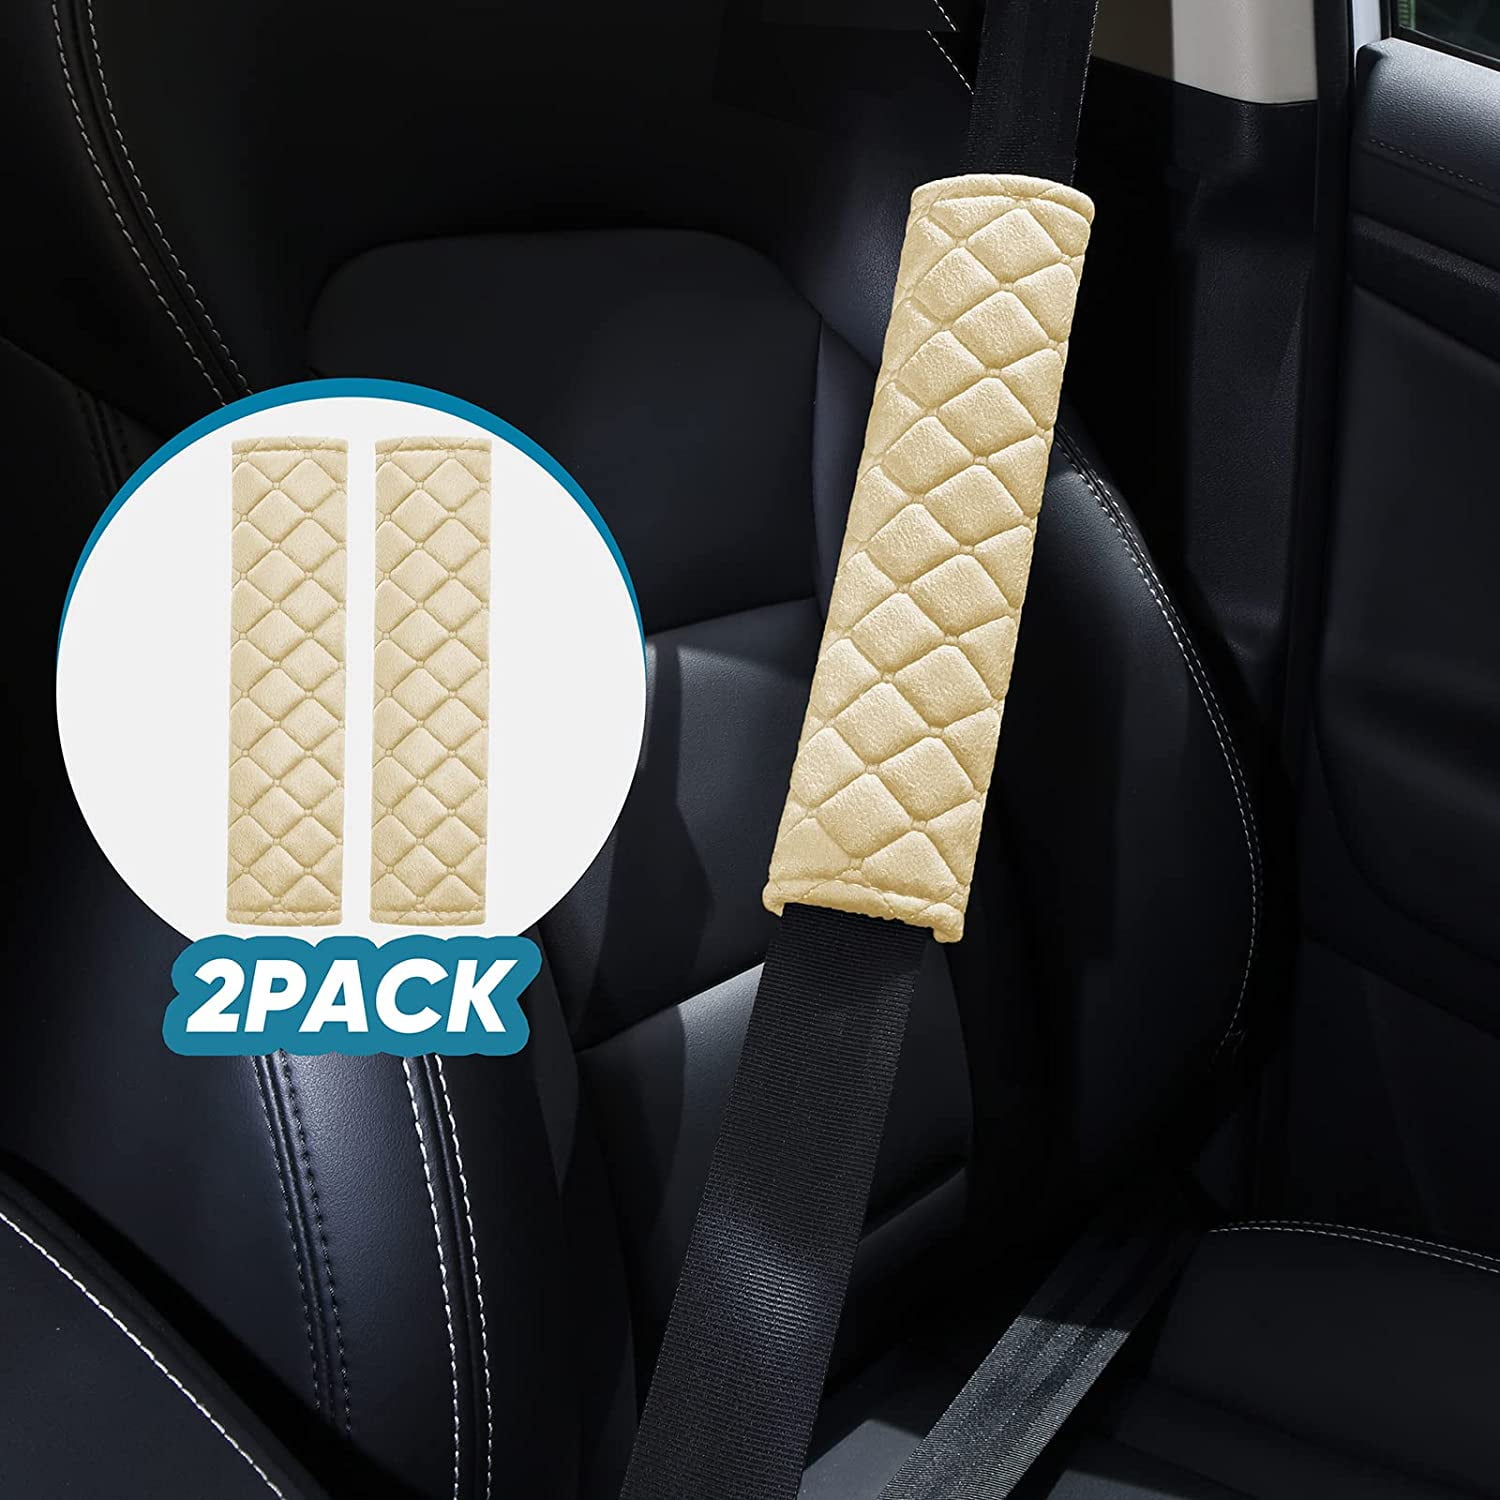 Casewin 1 Pair Car Seat Belt Pads Seatbelt Protector Soft Comfort Seat Belt  Shoulder Strap Covers Harness Pads Helps Protect Your Neck and Shoulder